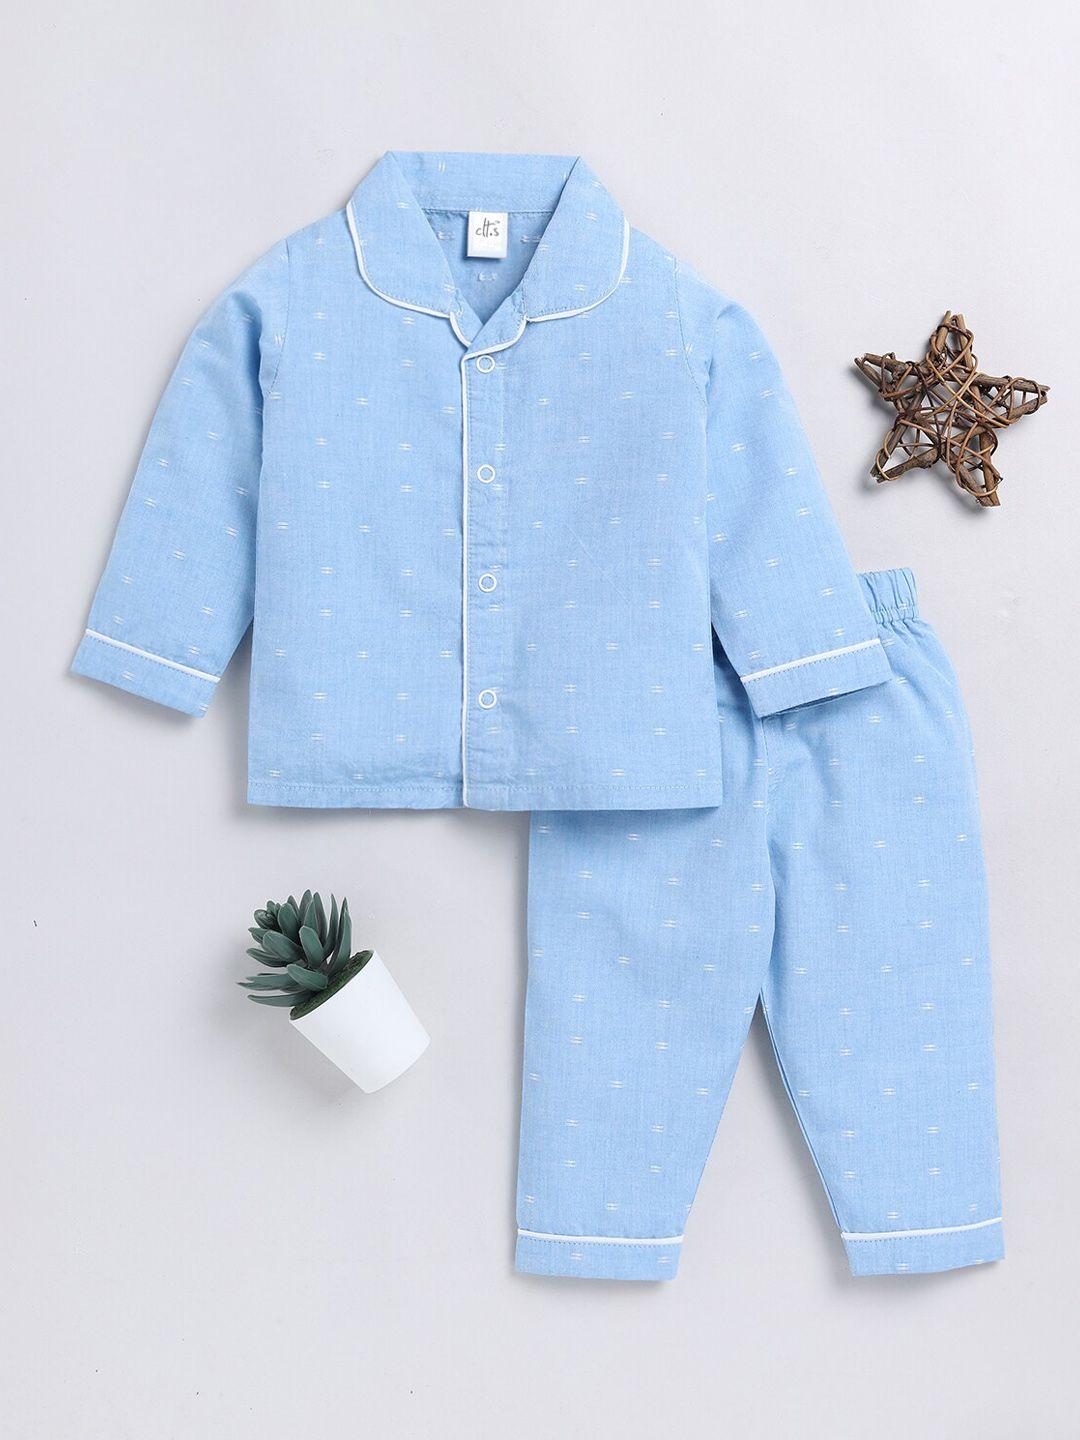 clt.s kids graphic printed night suit